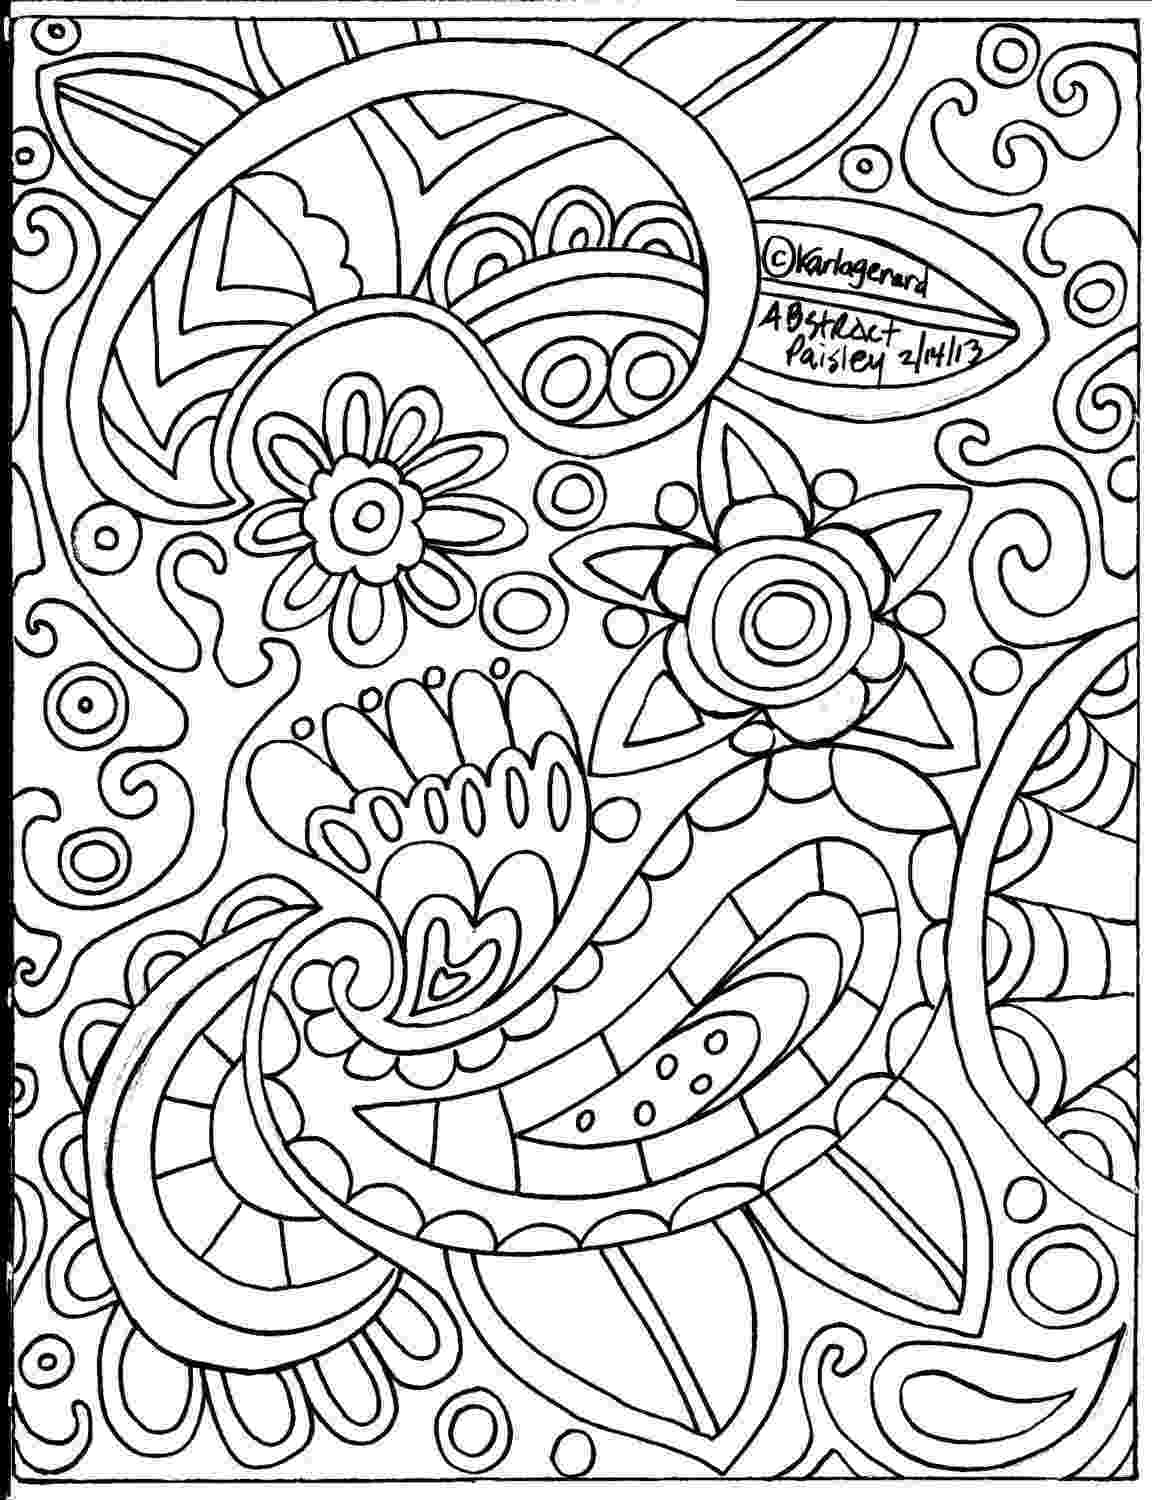 coloring patterns pattern coloring pages best coloring pages for kids coloring patterns 